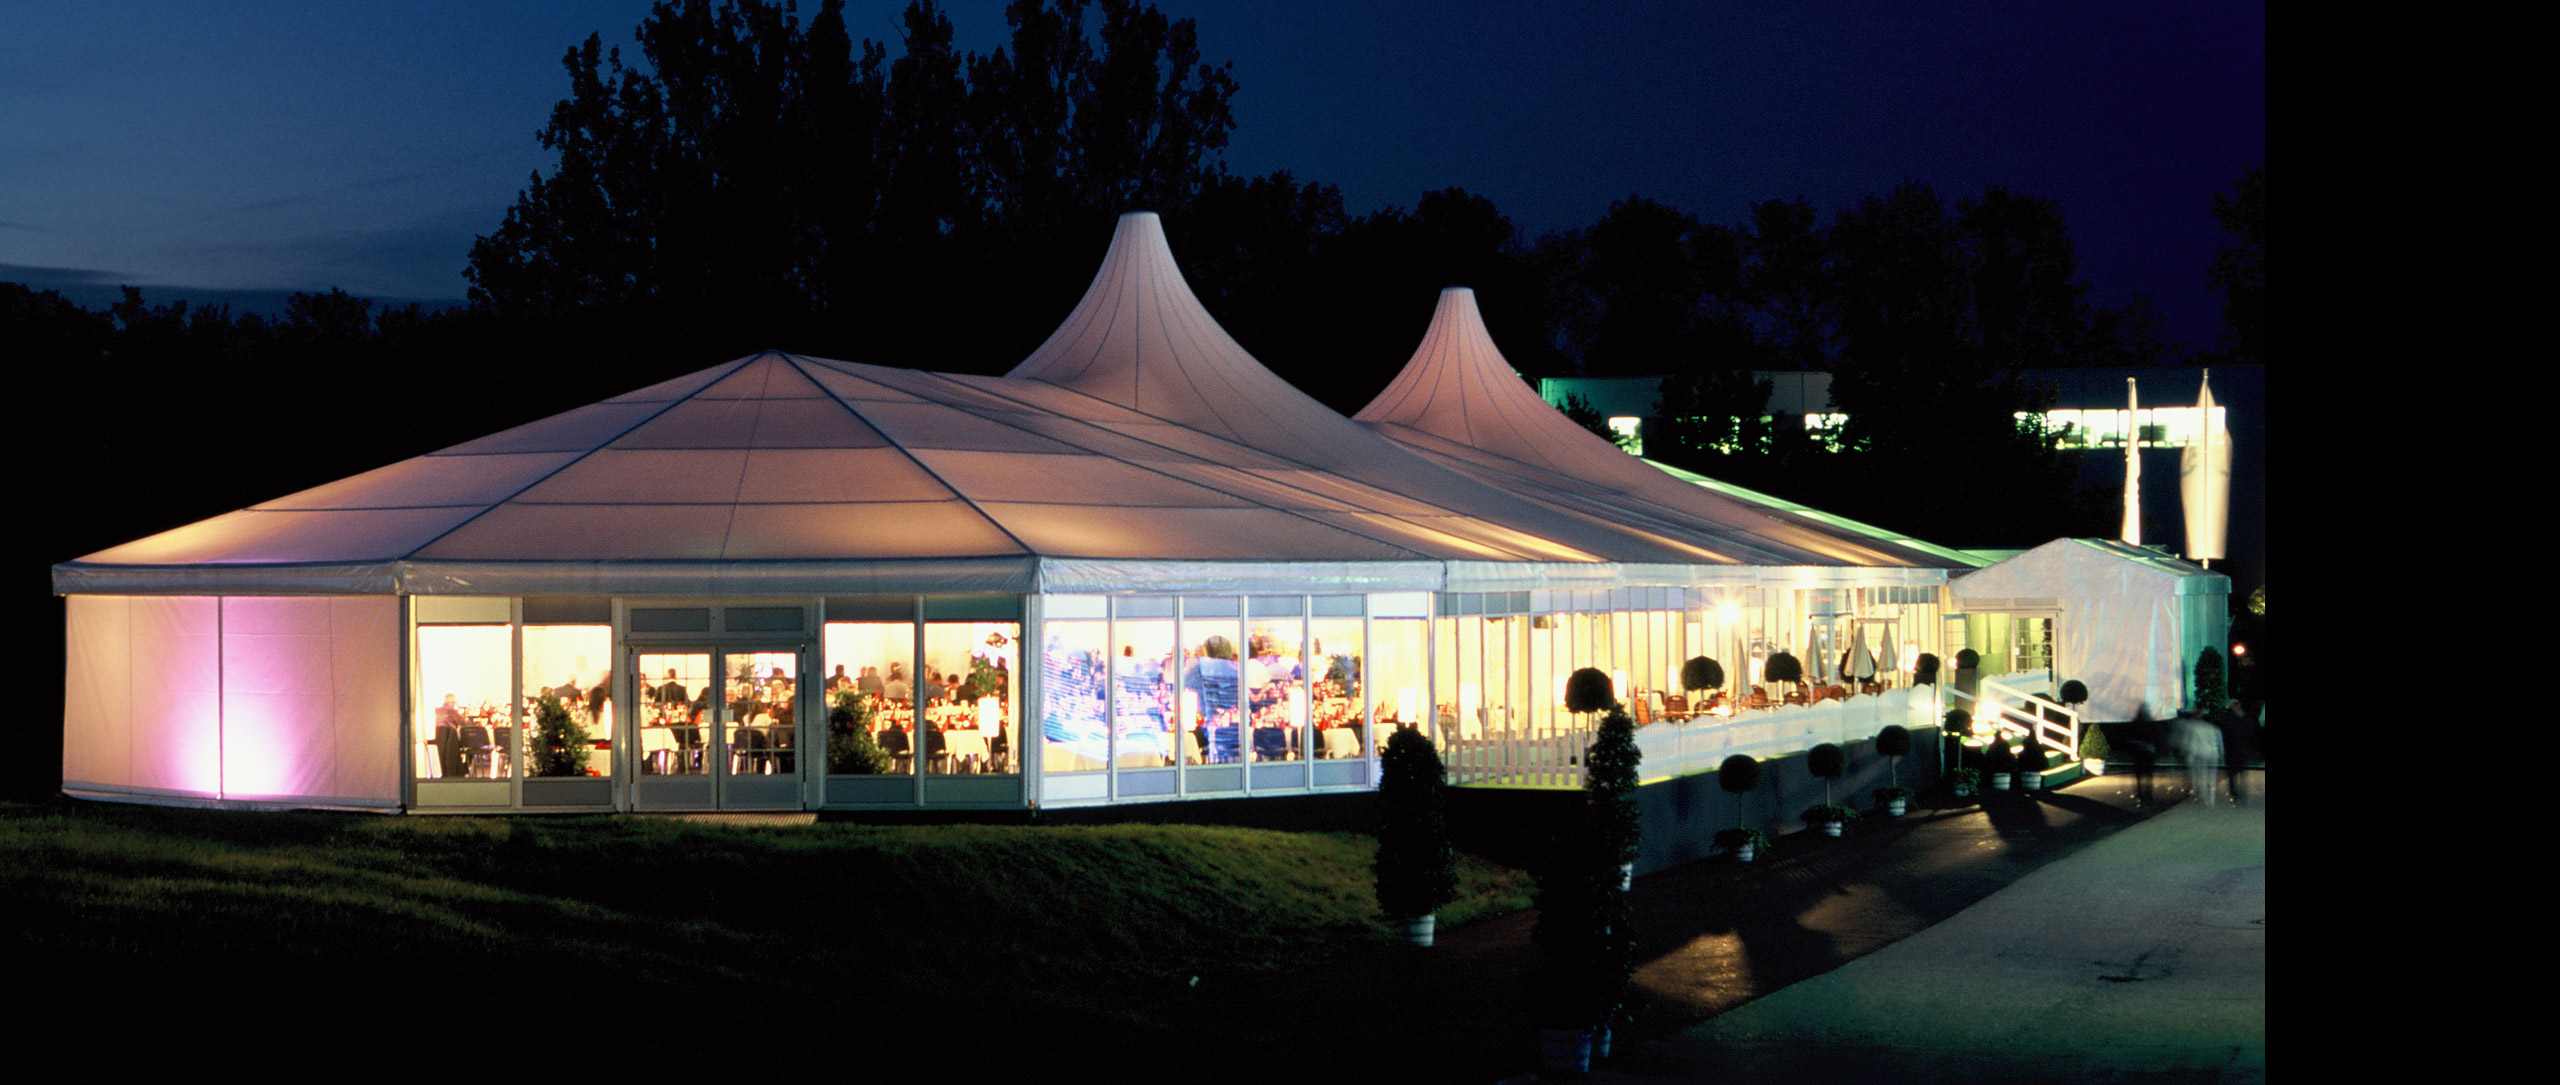 Röder B-TENTS Large Marquee with High Point